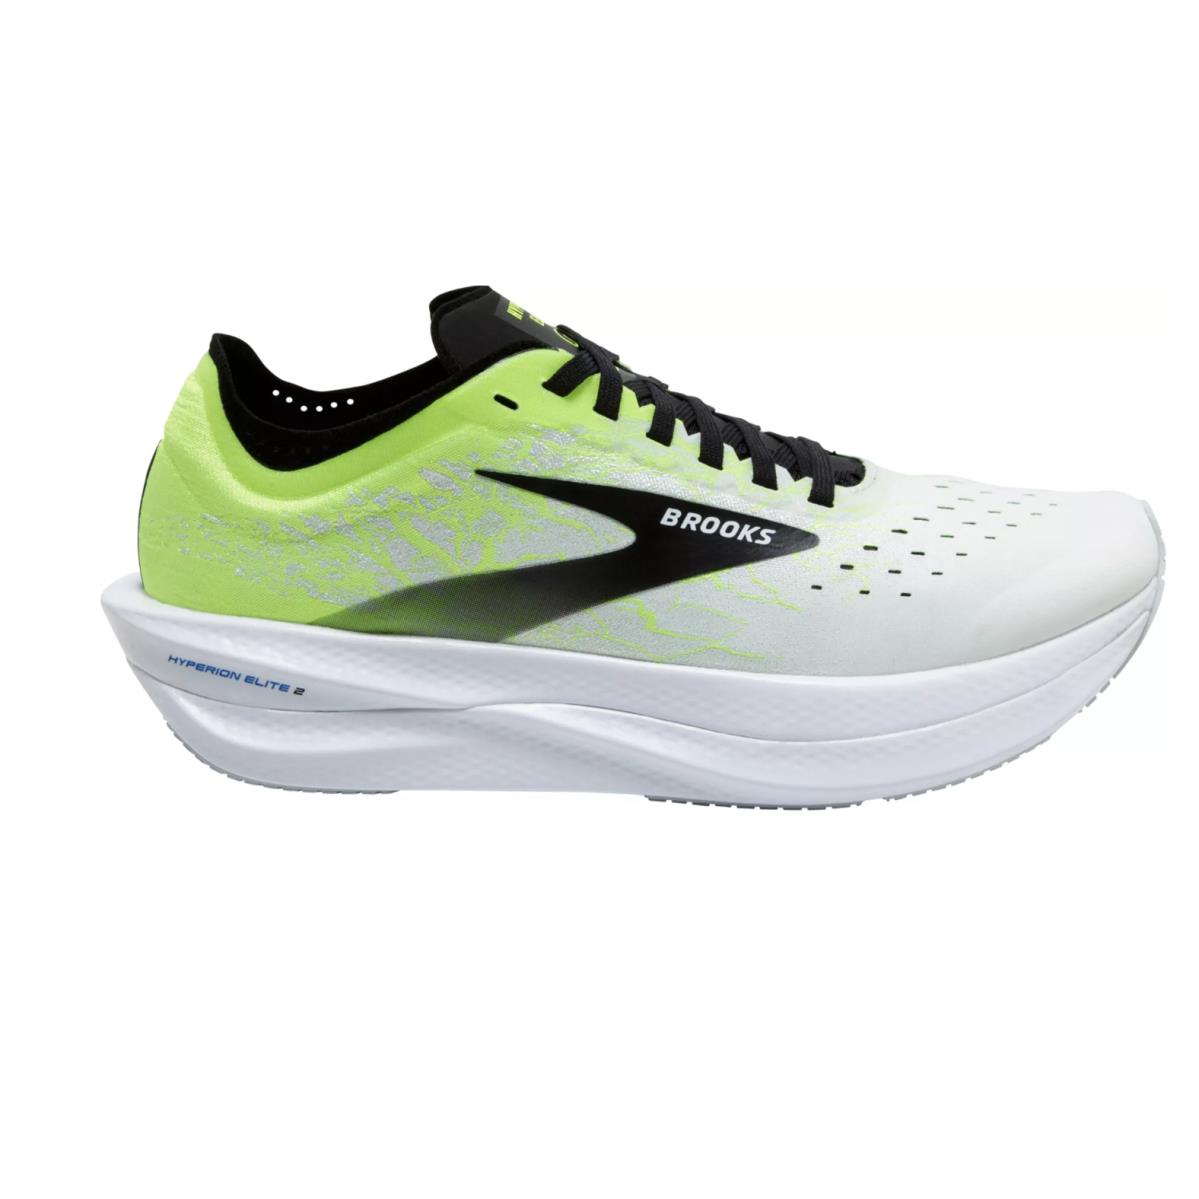 Brooks Hyperion Elite 2 Running Shoes Style 1000371D172